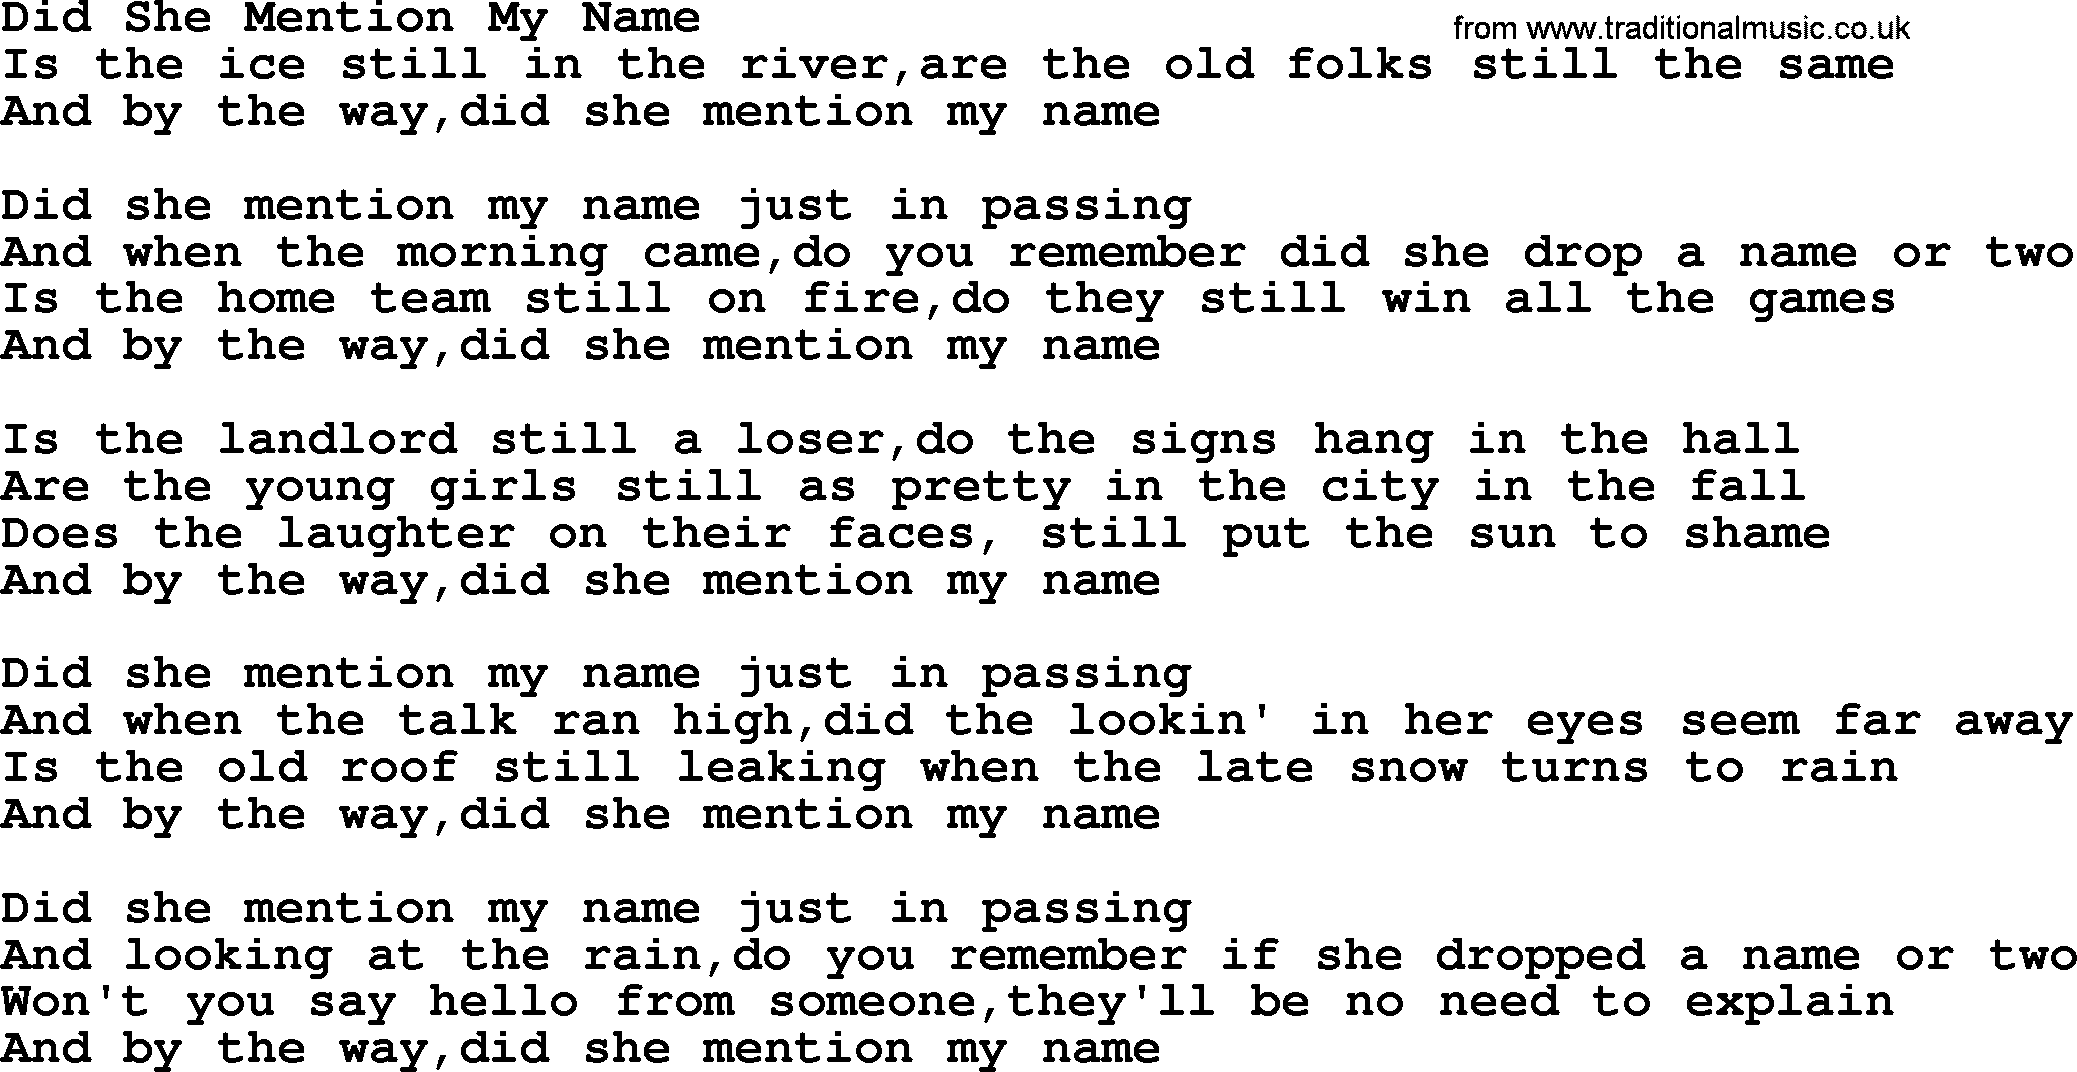 Bluegrass song: Did She Mention My Name, lyrics and chords